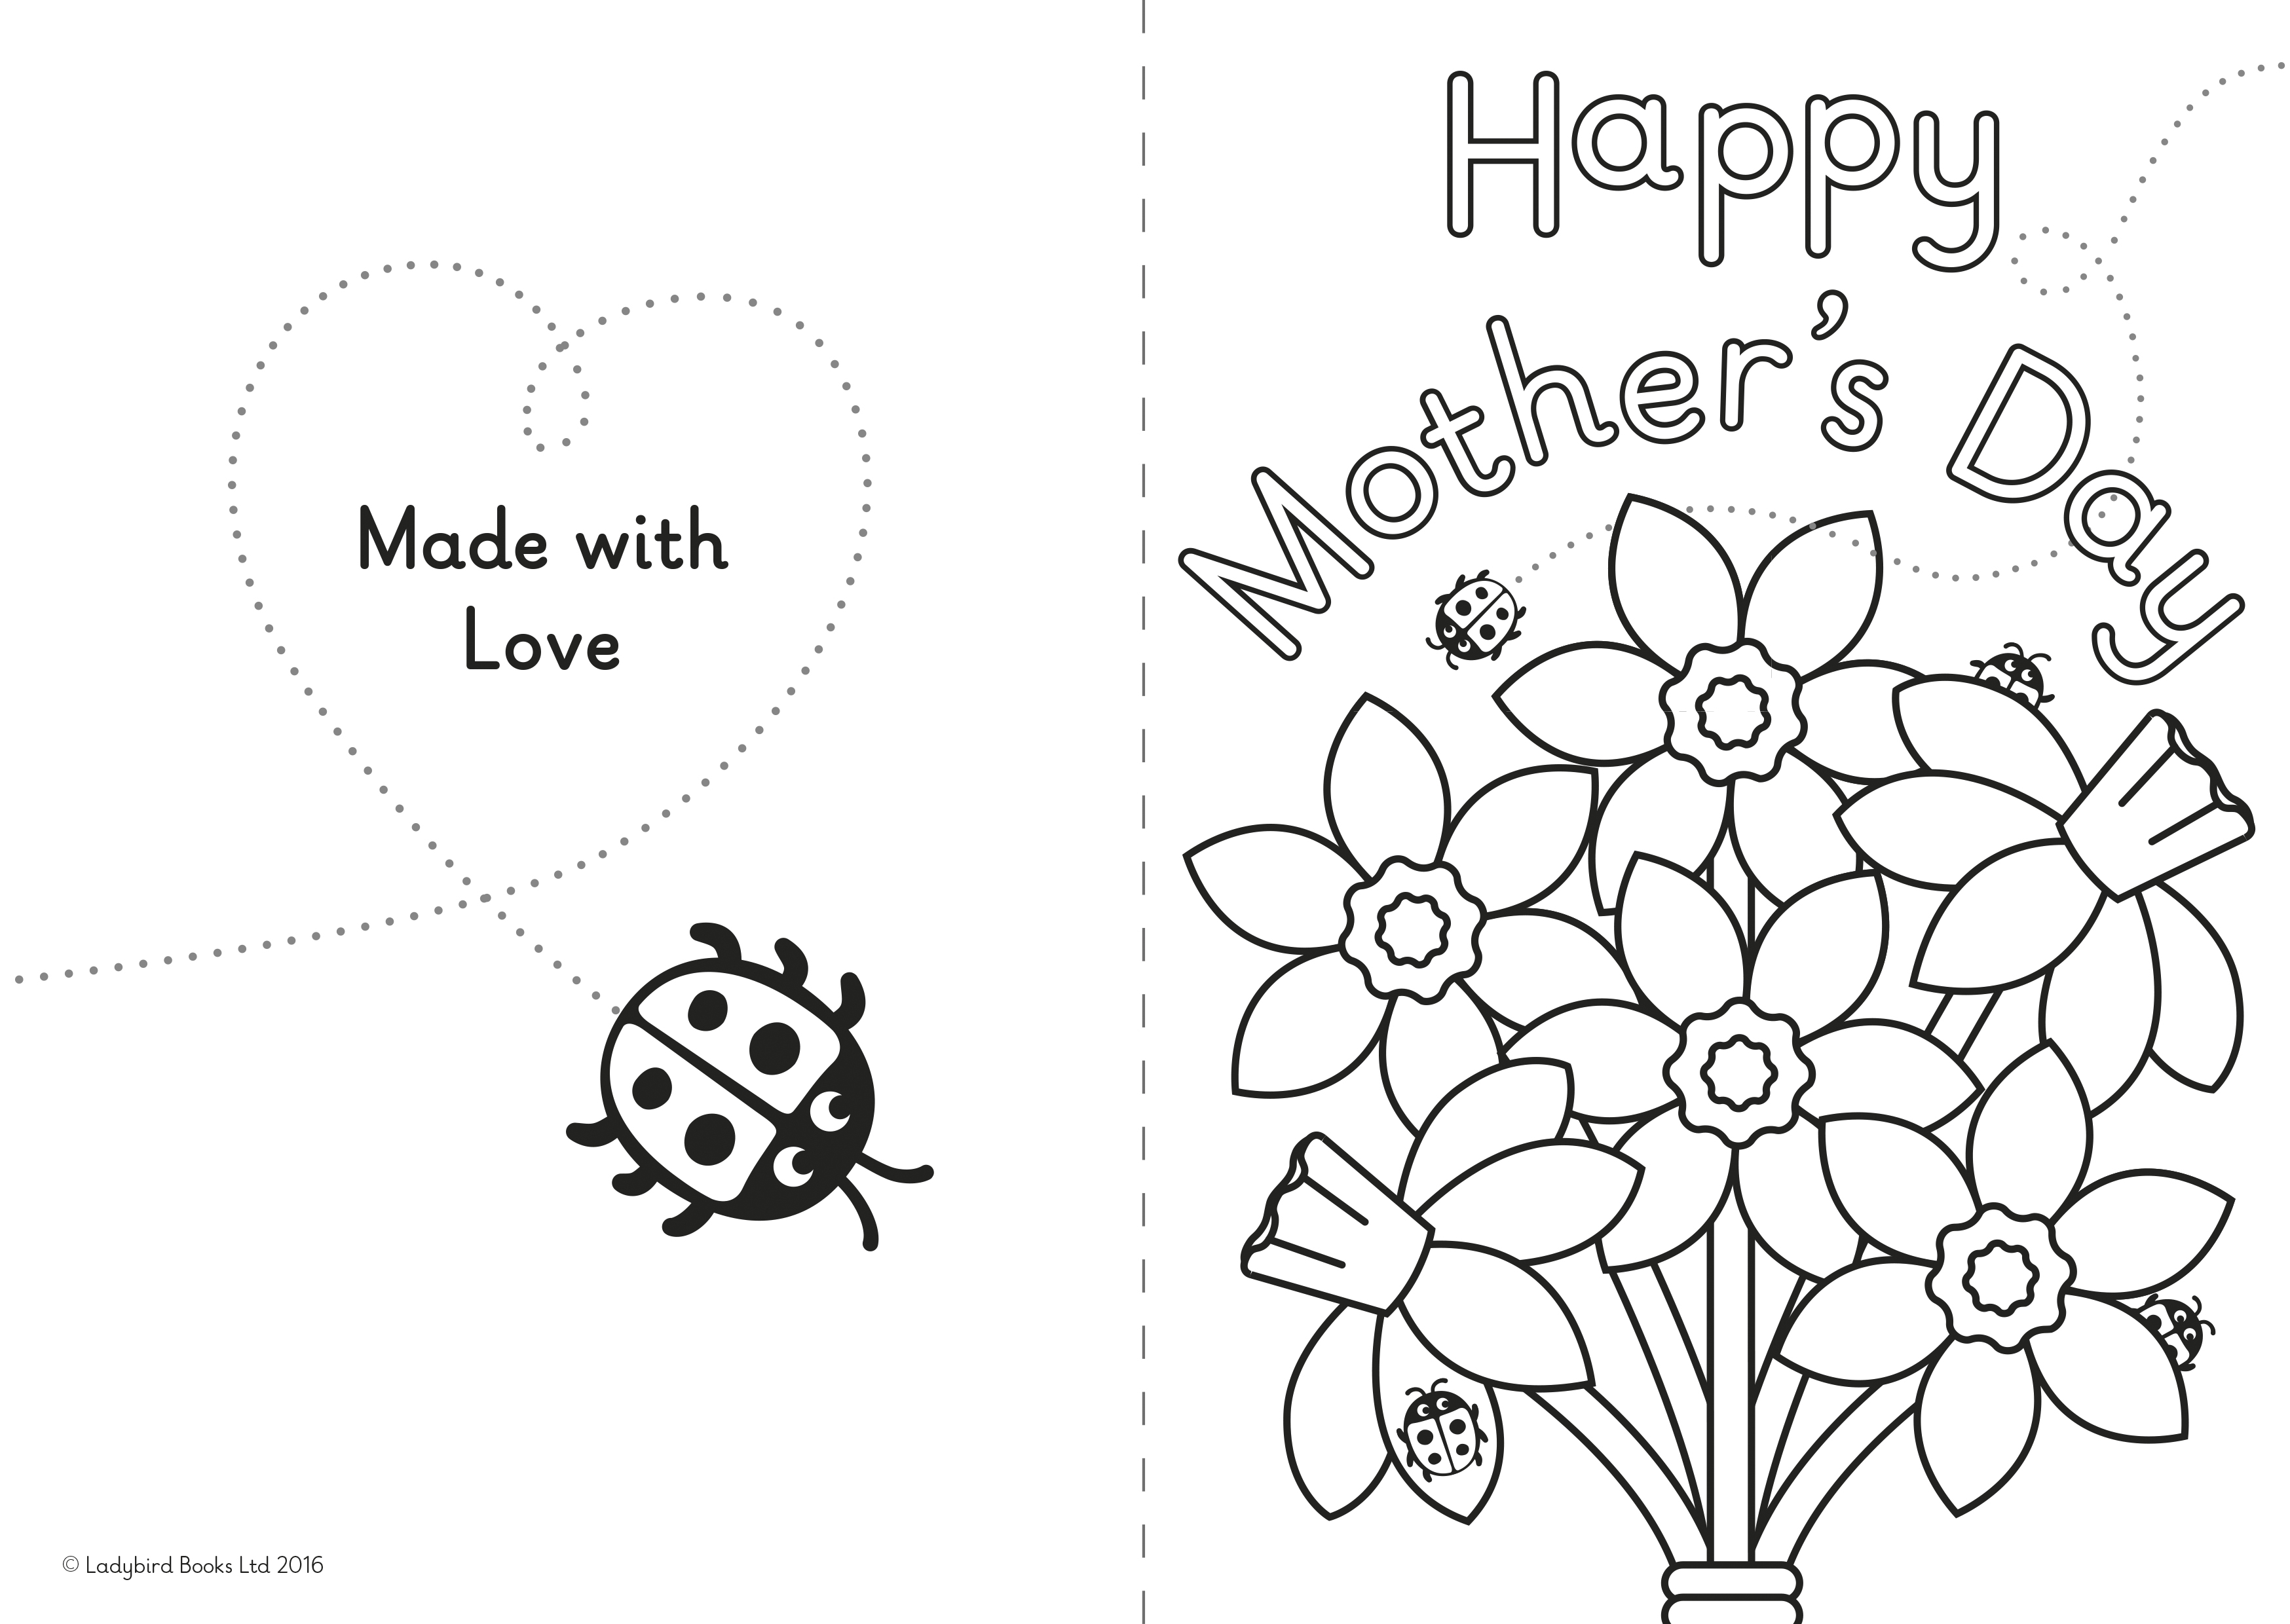 A DIY Mother’s Day card for little ones.